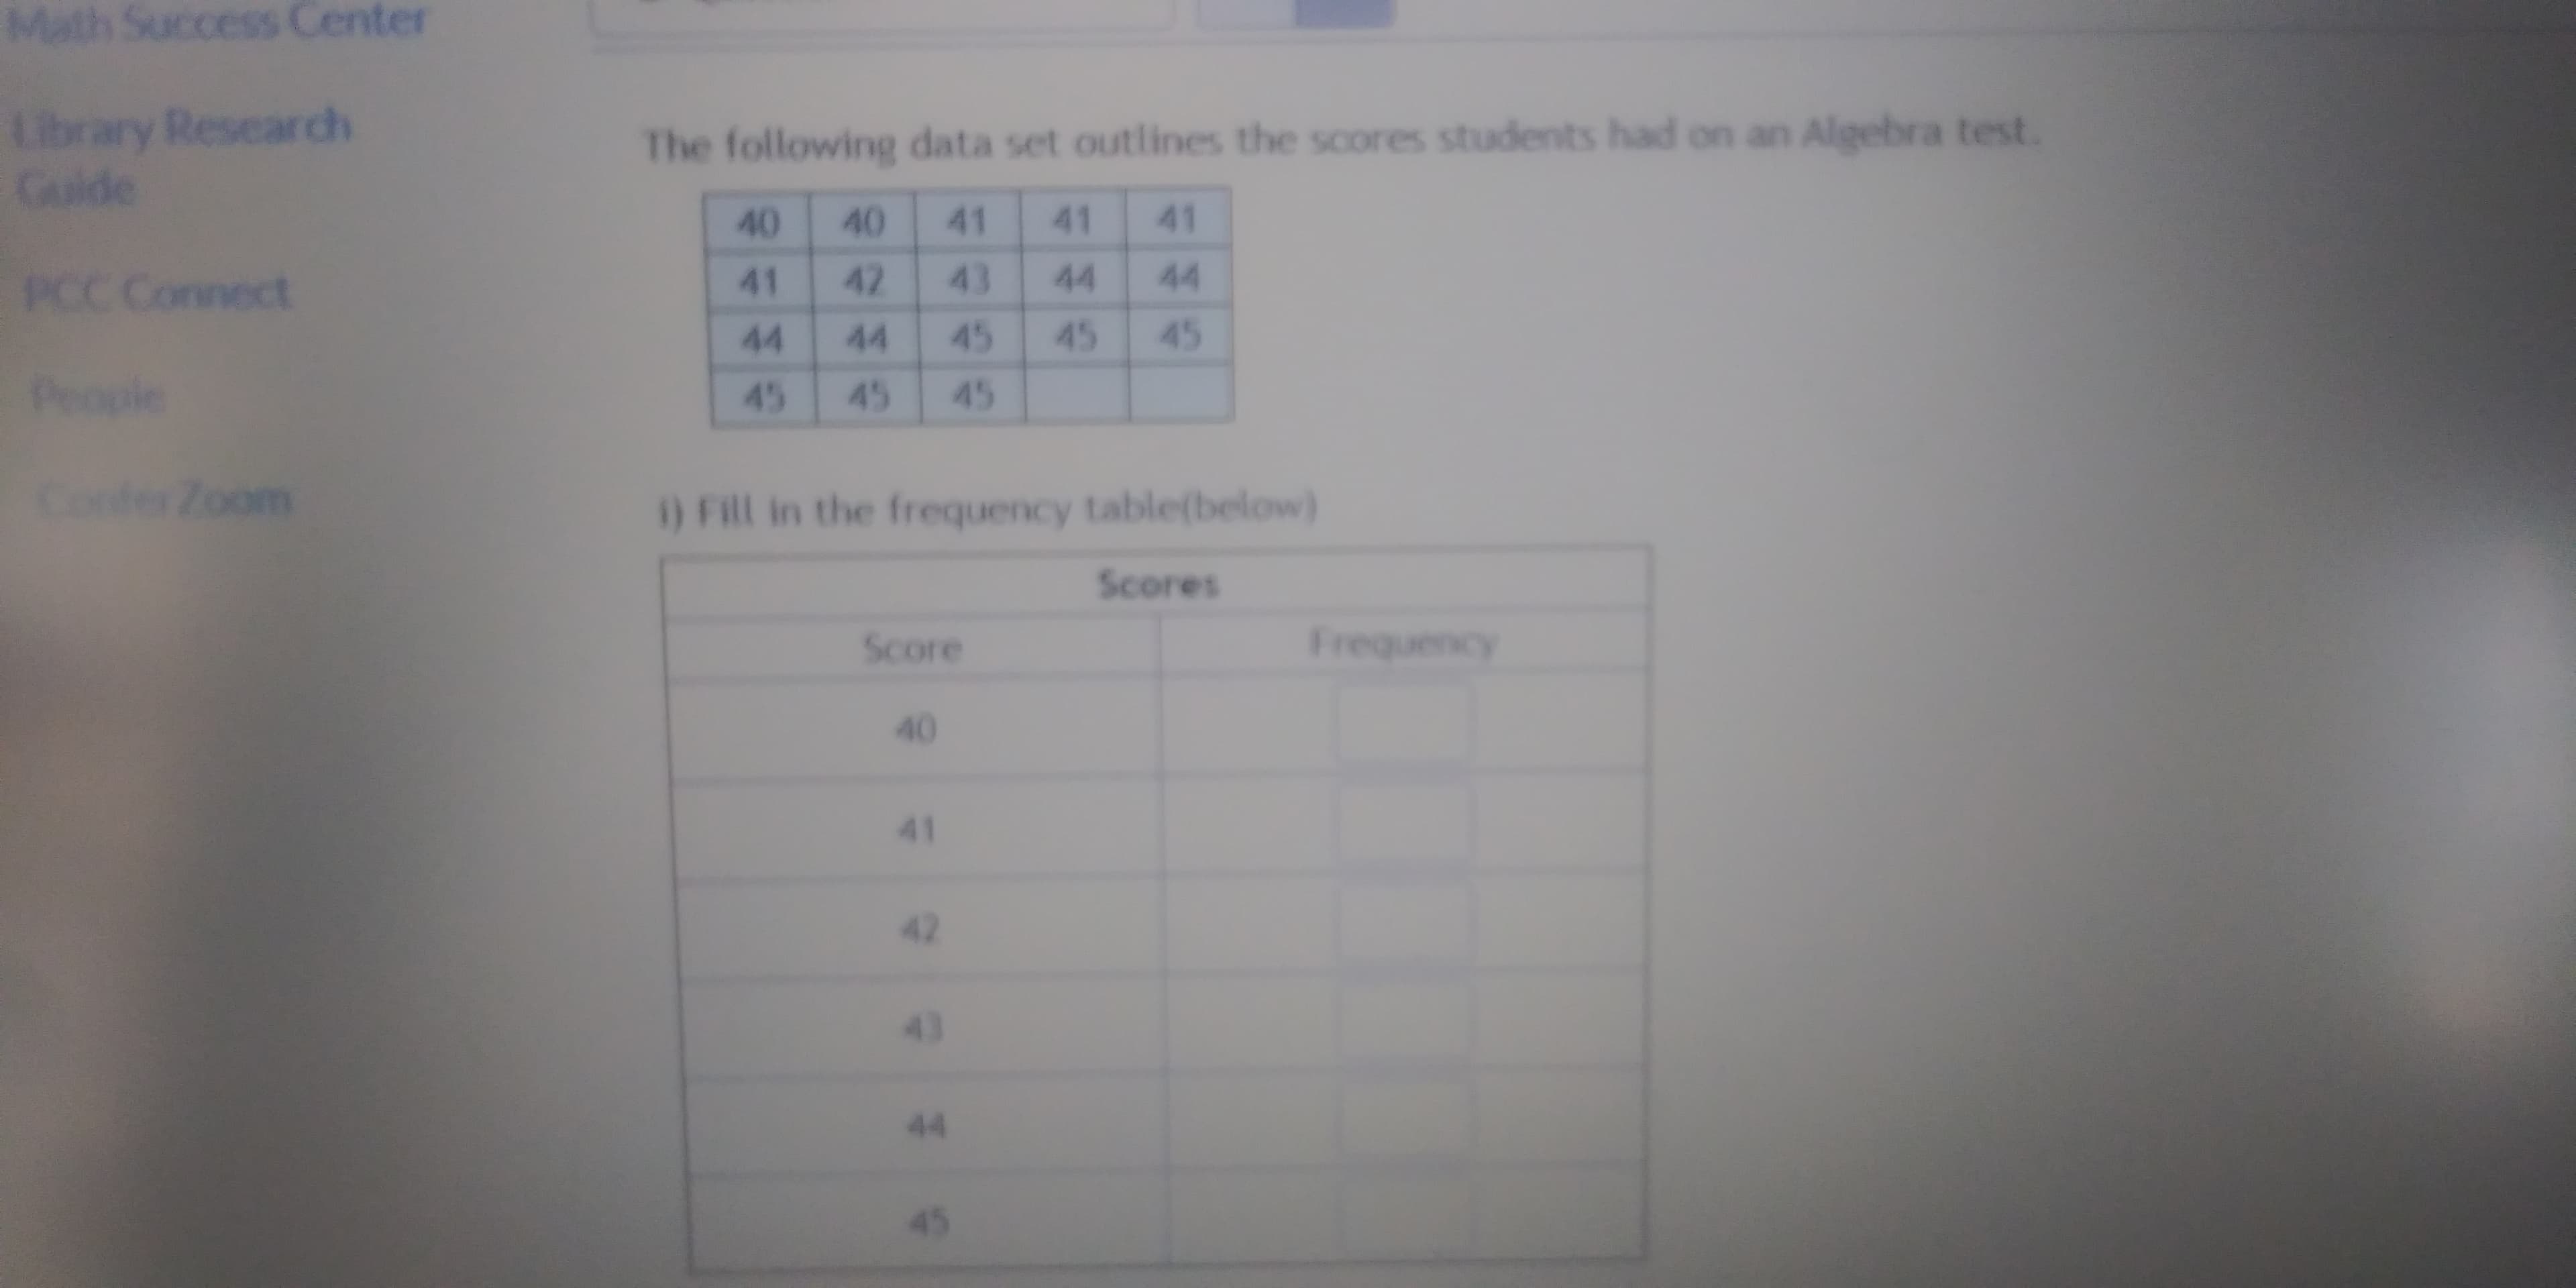 The following data set outlines the scores students had on an Algebra test.
40
40
41
41
41
41
42
43
44
44
44
44
45
45
45
45
45
45
) FIll in the frequency table(below)
Scores
Score
Frequency
40
41
42
43
44
